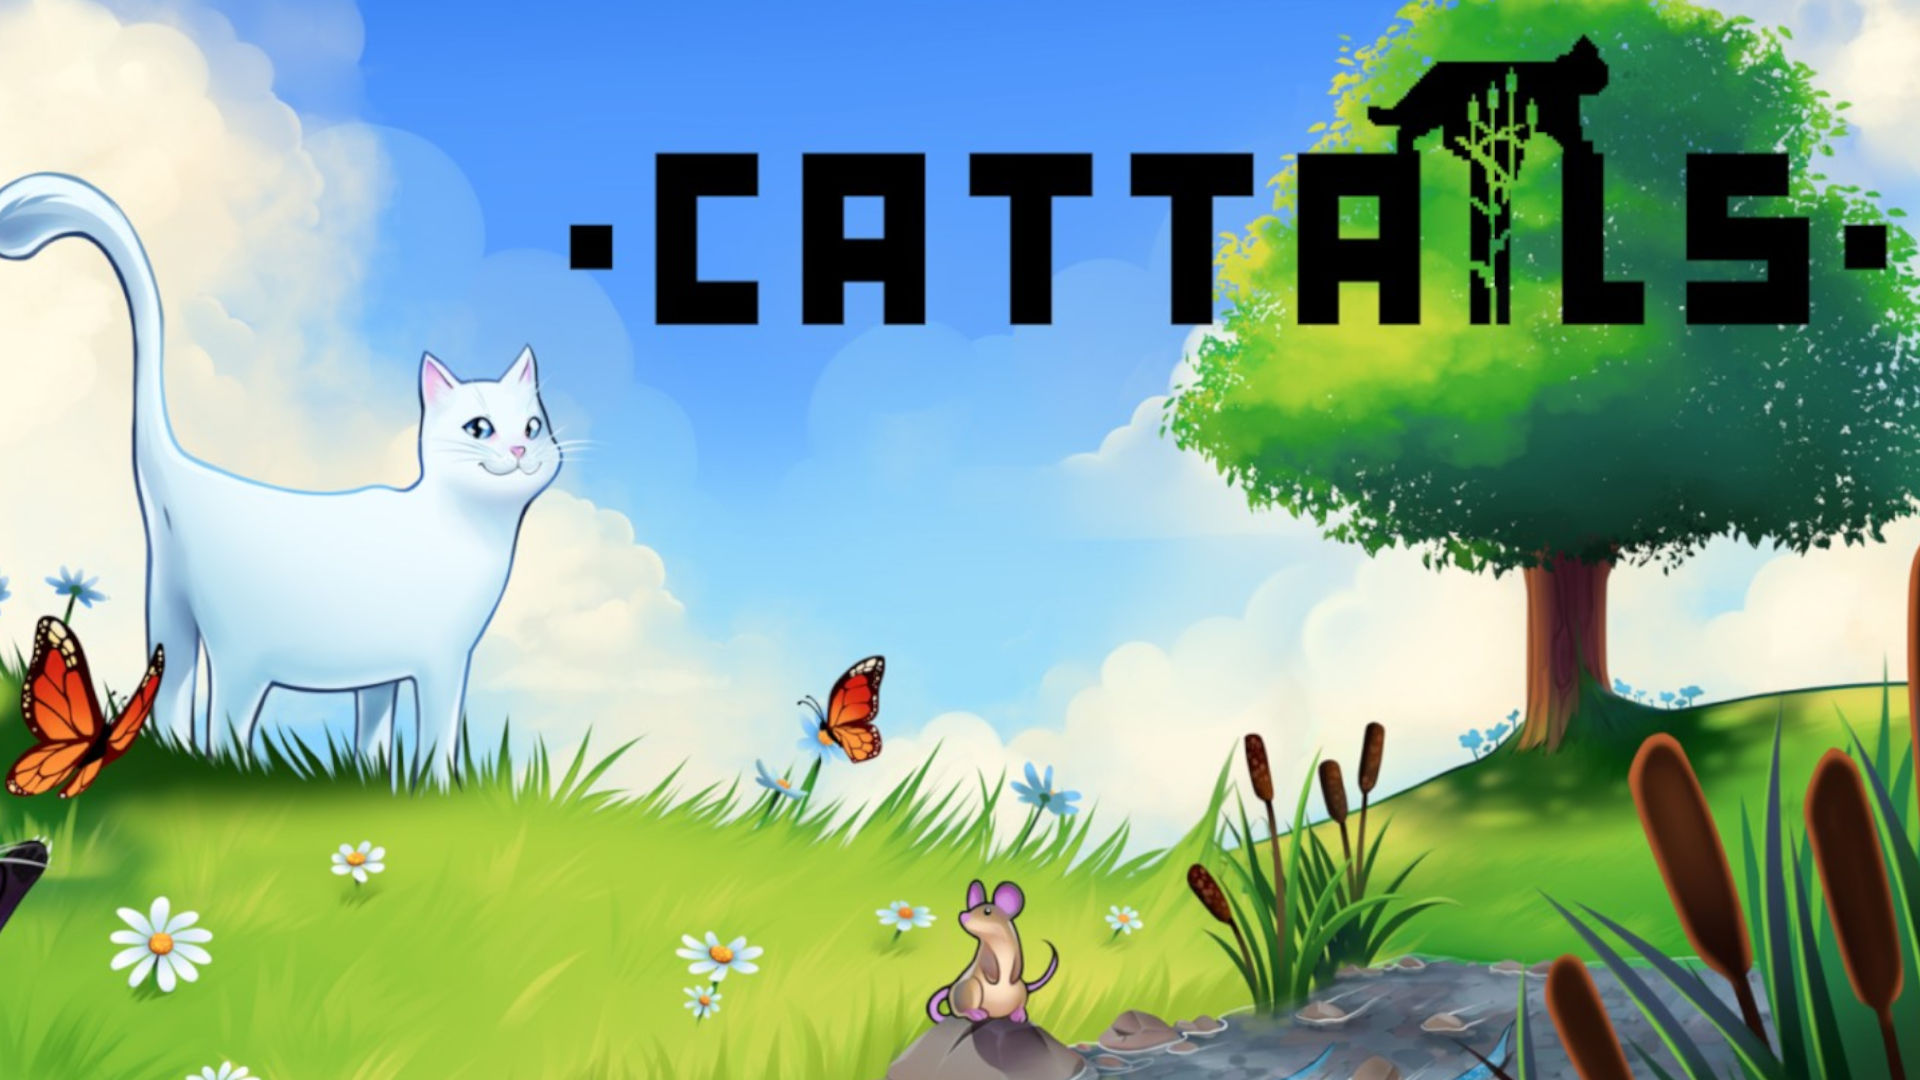 The cat's meow – the best cat games on Switch and mobile